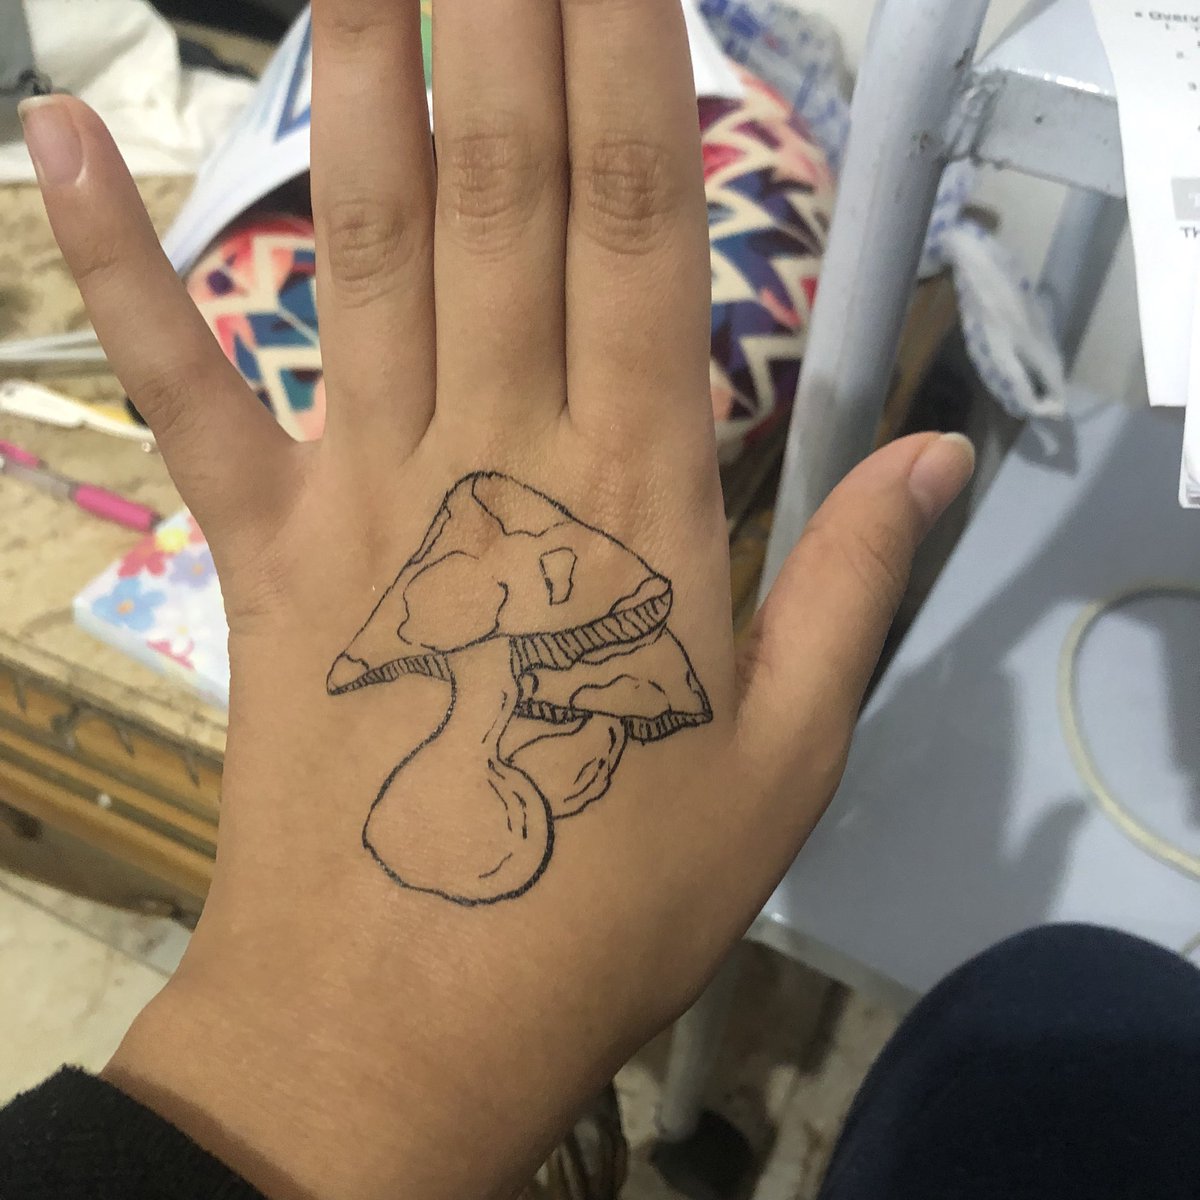 I am starting to think I draw mushrooms a lot these days… BUT MUSHROOMS TEMPORARY TATTOOS ARE THE BEST!!! (Ps: I drew this with an eyeliner so SLAY MOI!!)
#tattooart #temporarytattoo #eyelinerart #art #shrooms